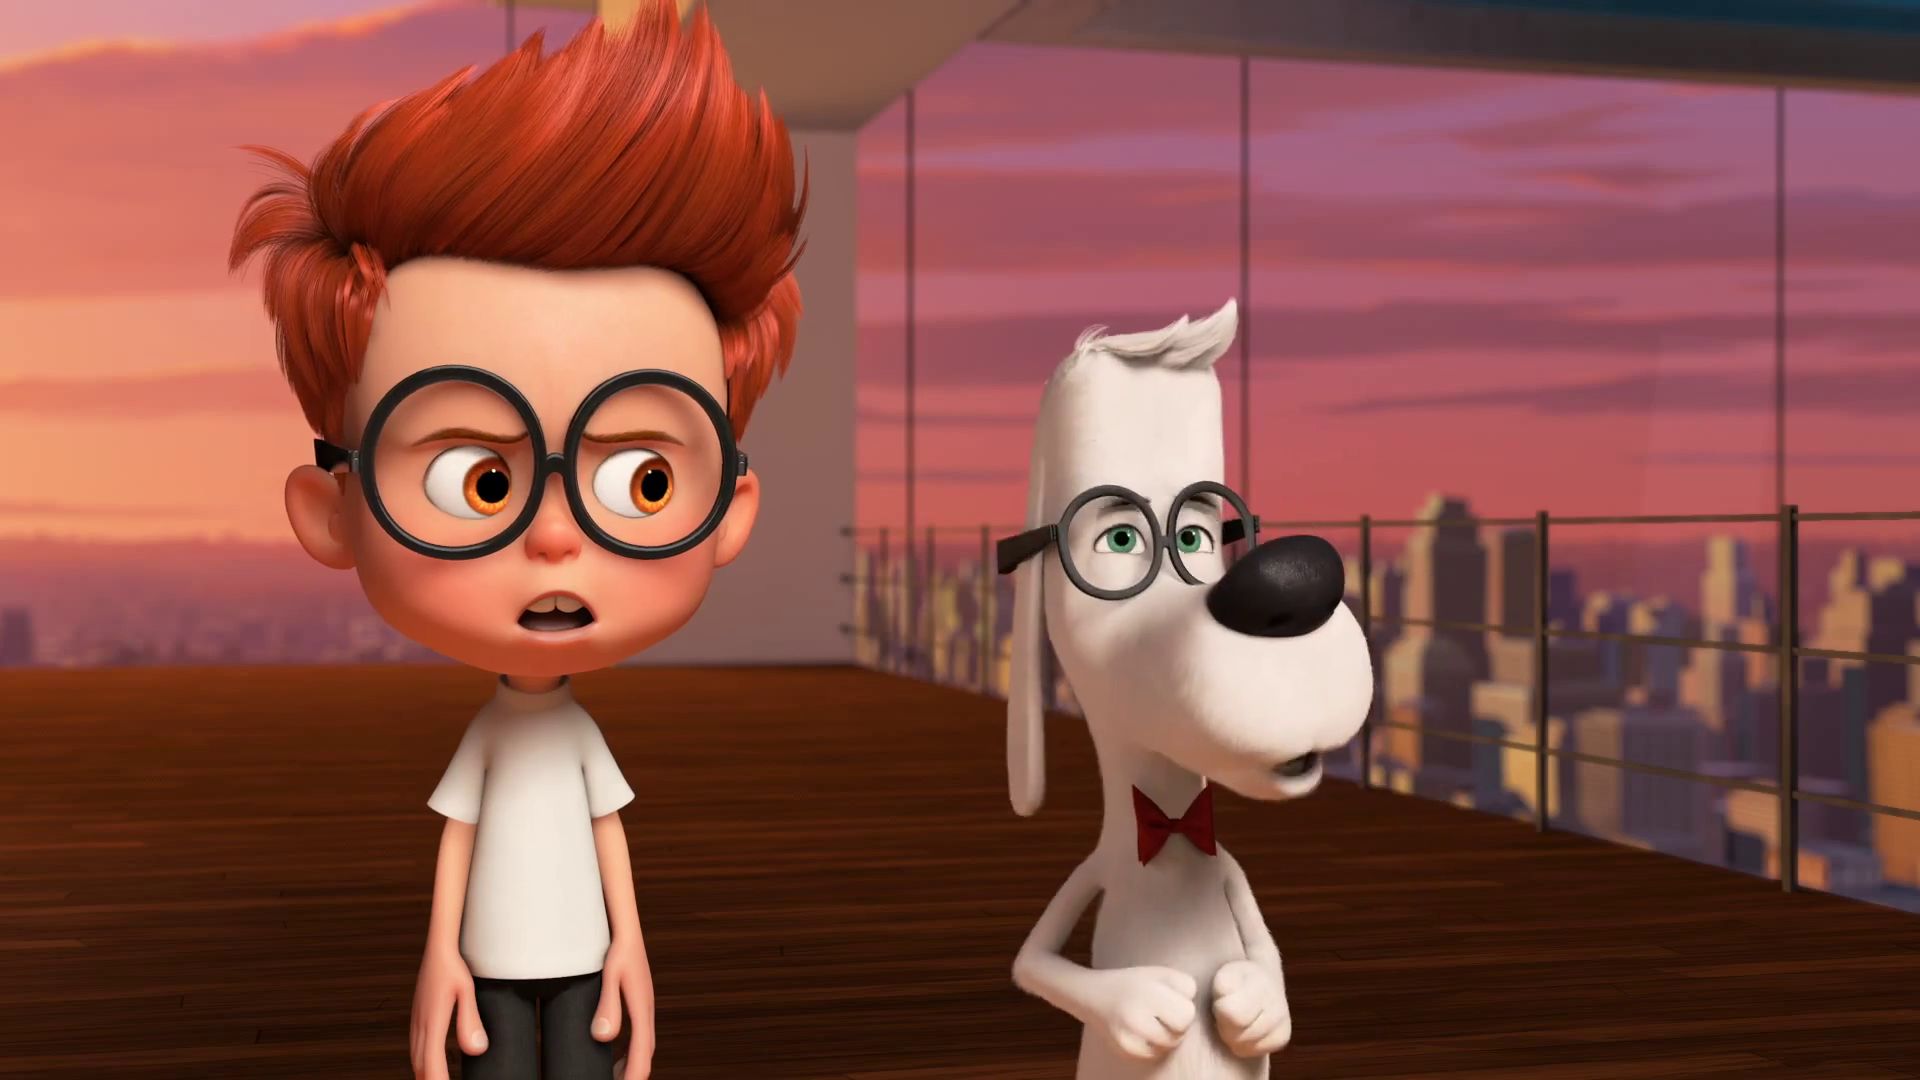 Mr. Peabody & Sherman Backgrounds, Compatible - PC, Mobile, Gadgets| 1920x1080 px